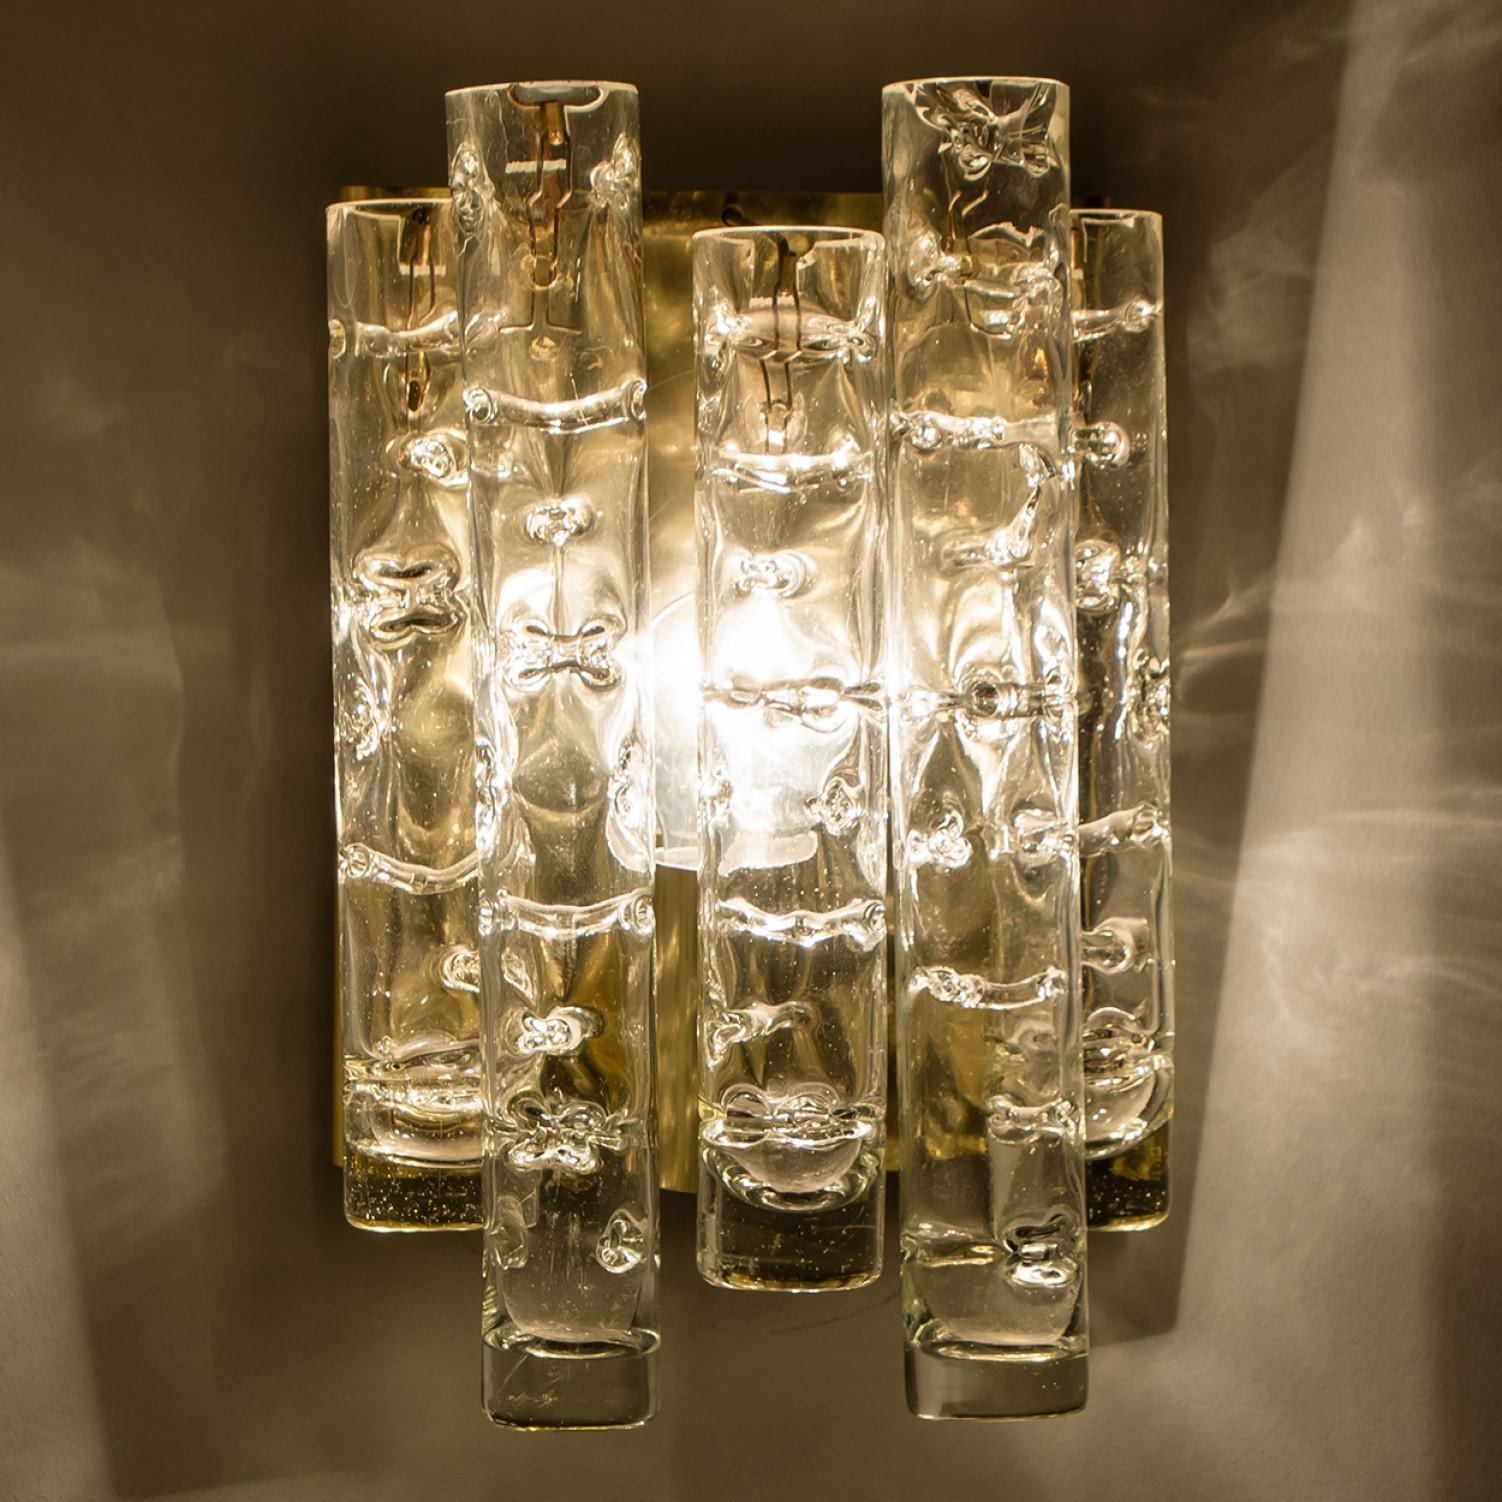 Pair of Structured Tubes Wall Lights by Doria Leuchten, 1960s For Sale 4